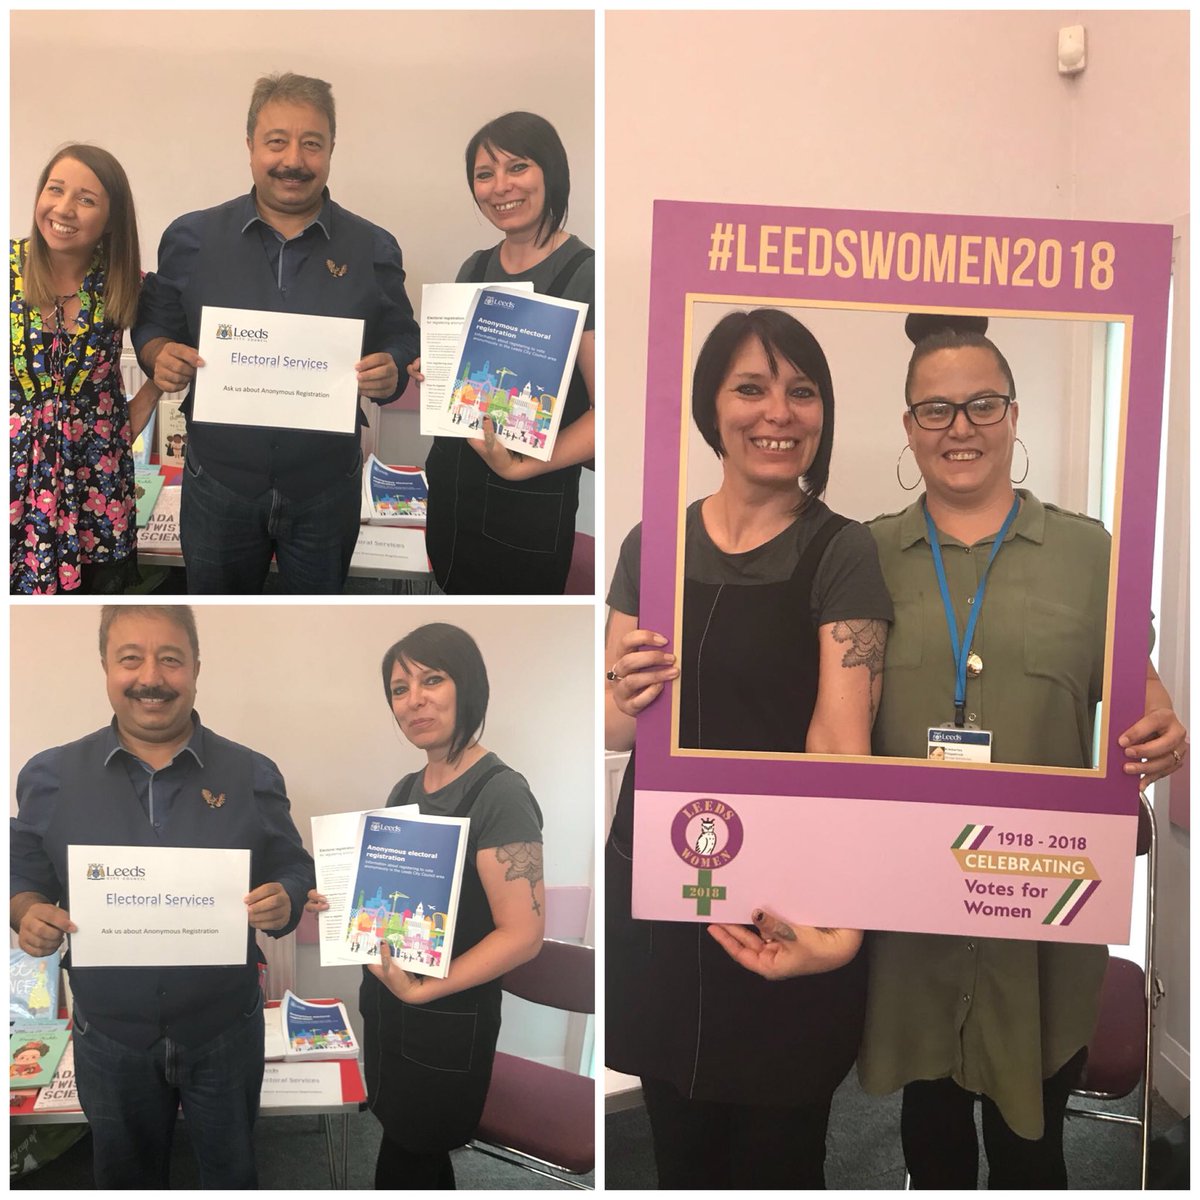 Proud my team are attending the @leeds_women centenary event today to promote anonymous electoral registration @AngeSmi86676422 @JohnMulc @James_A_Rogers @GoharAlmassKhan #leedswomen2018